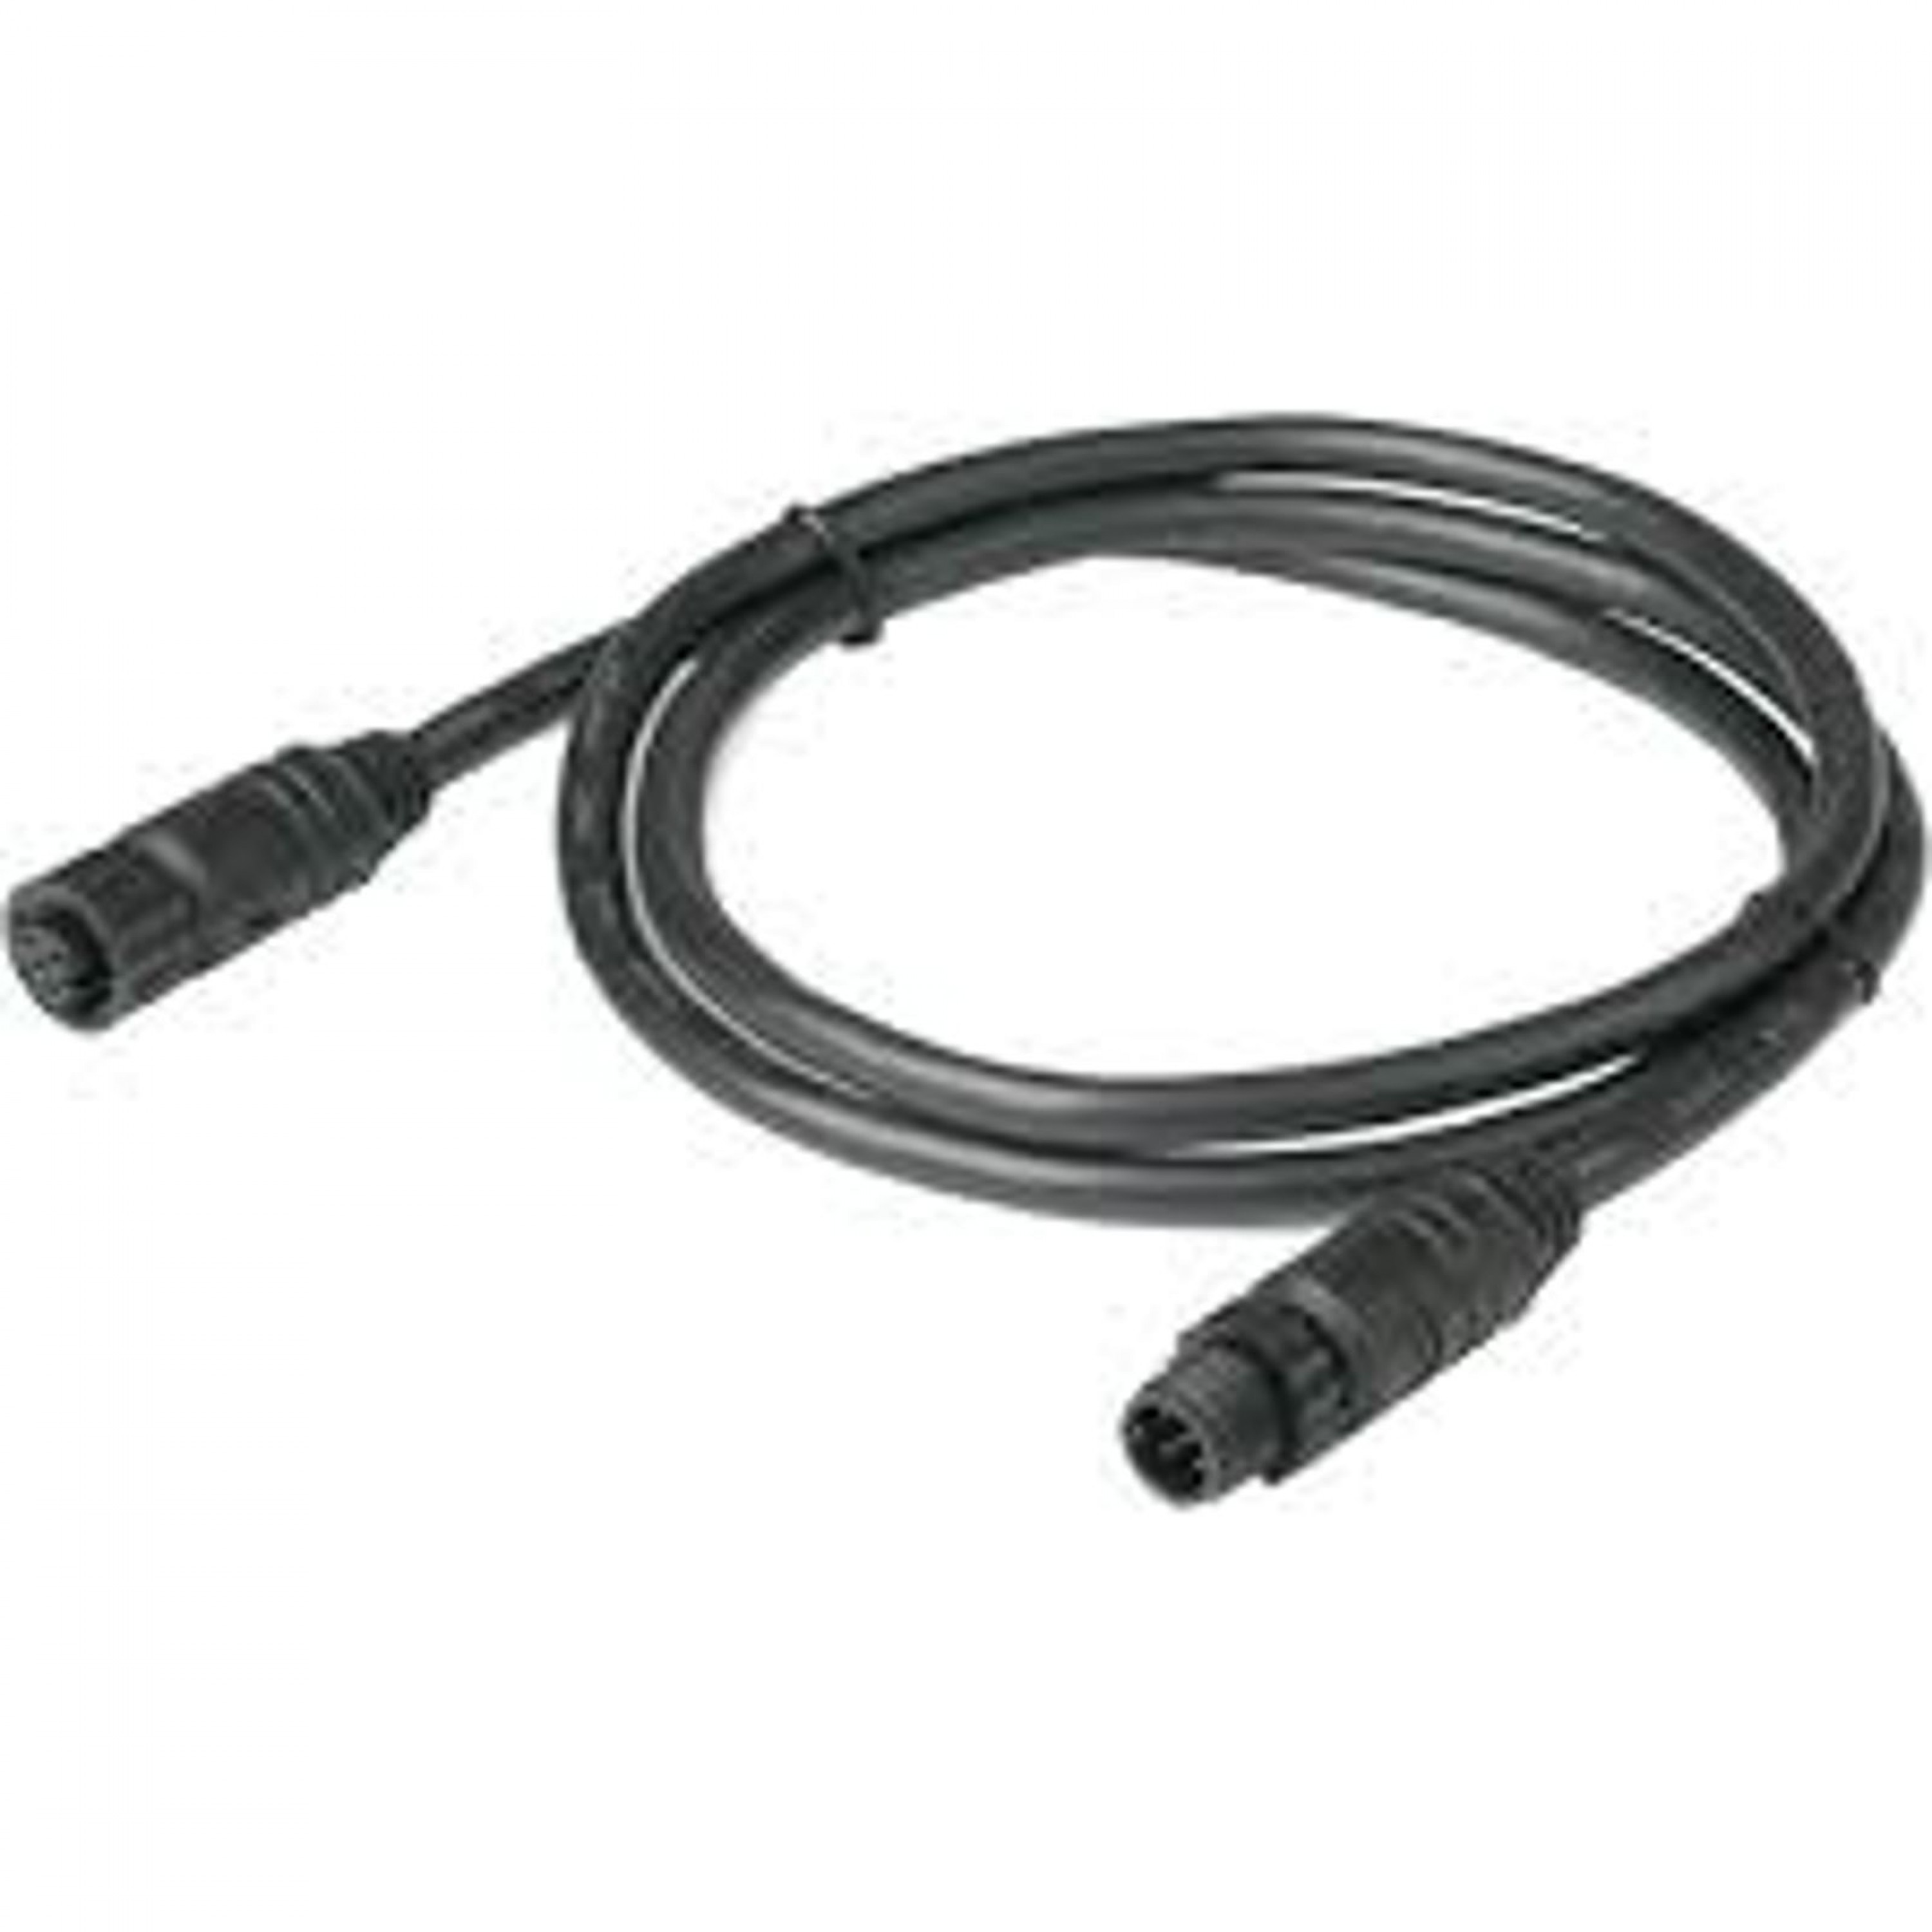 ANCOR DROP CABLE 1 METER (3.25 FT) UNIVERSAL FIT